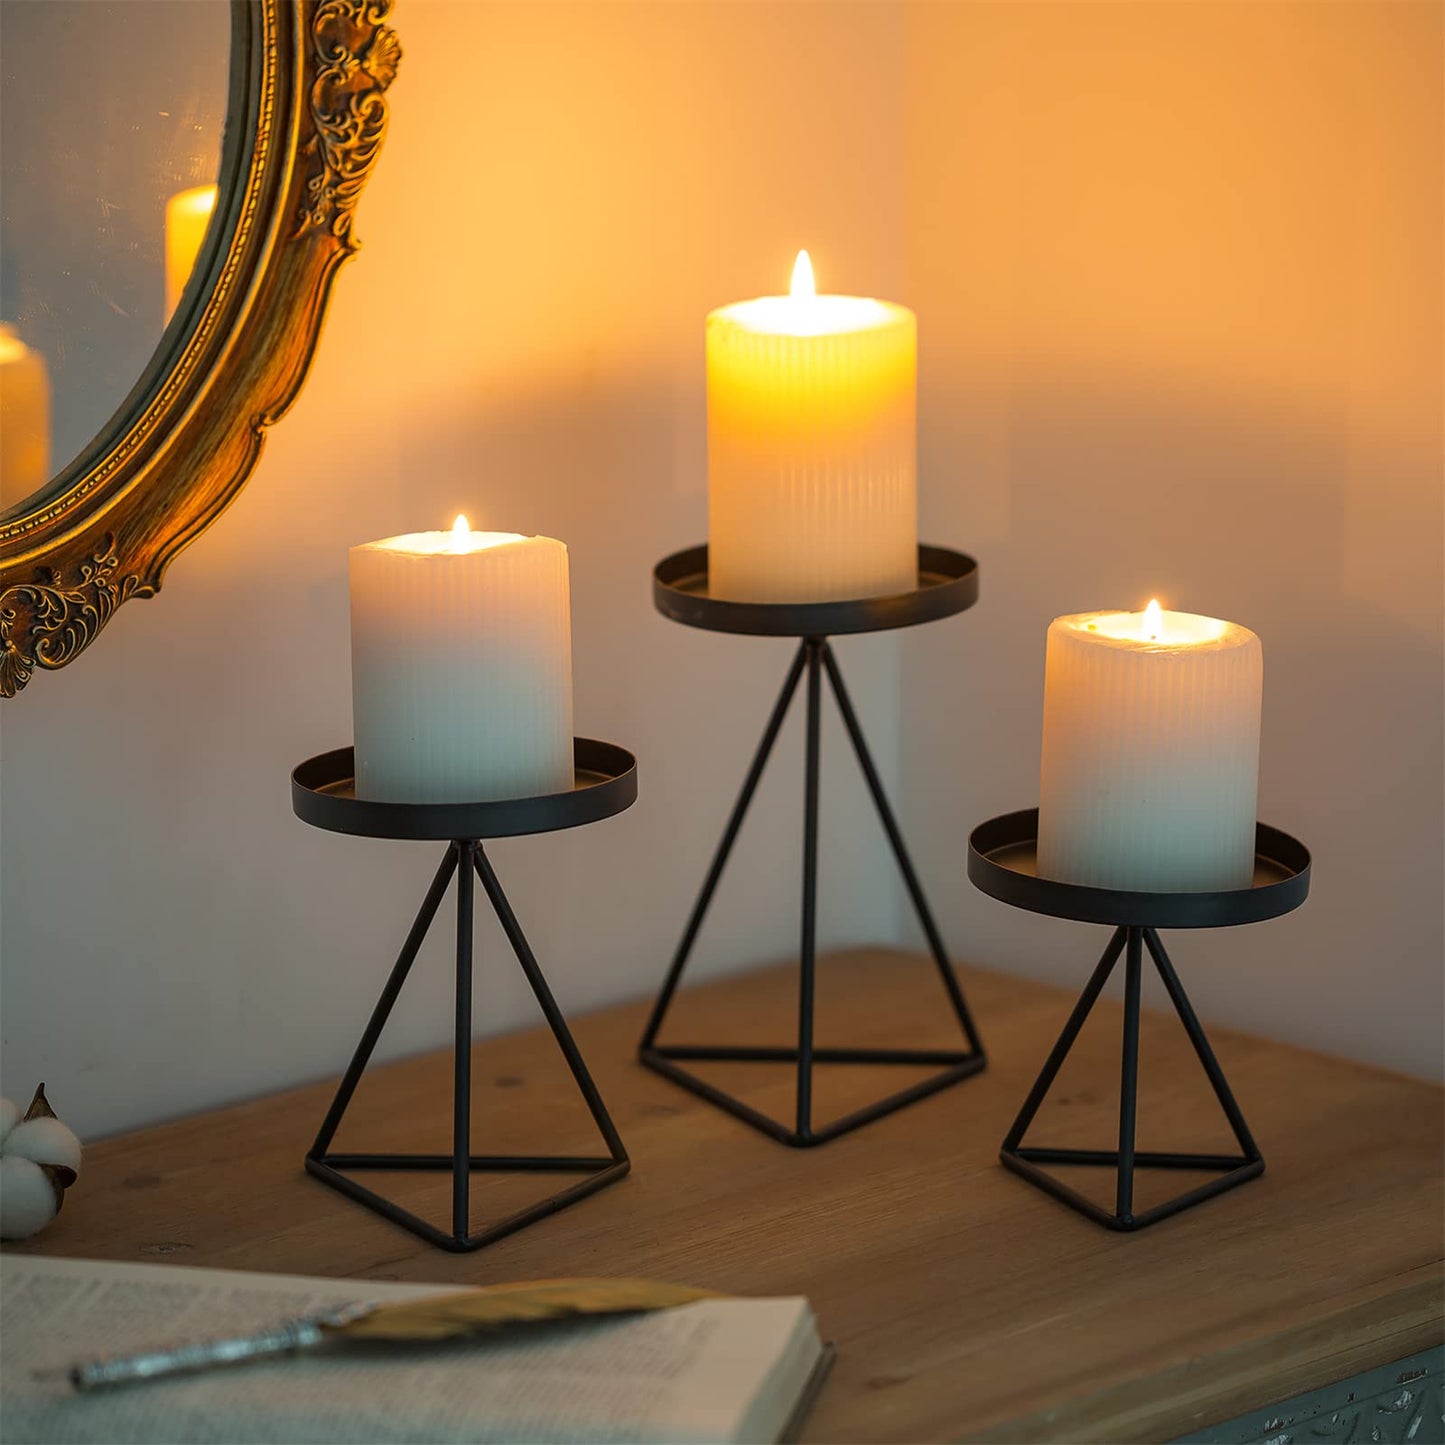 Sziqiqi 3Pcs Geometric Candle Holders for Pillar Candle Metal Wire Candlesticks Vintage Candle Stick Holder Stands Decor Candles Holder Table Centerpiece for Living Room Dining Room Fireplace